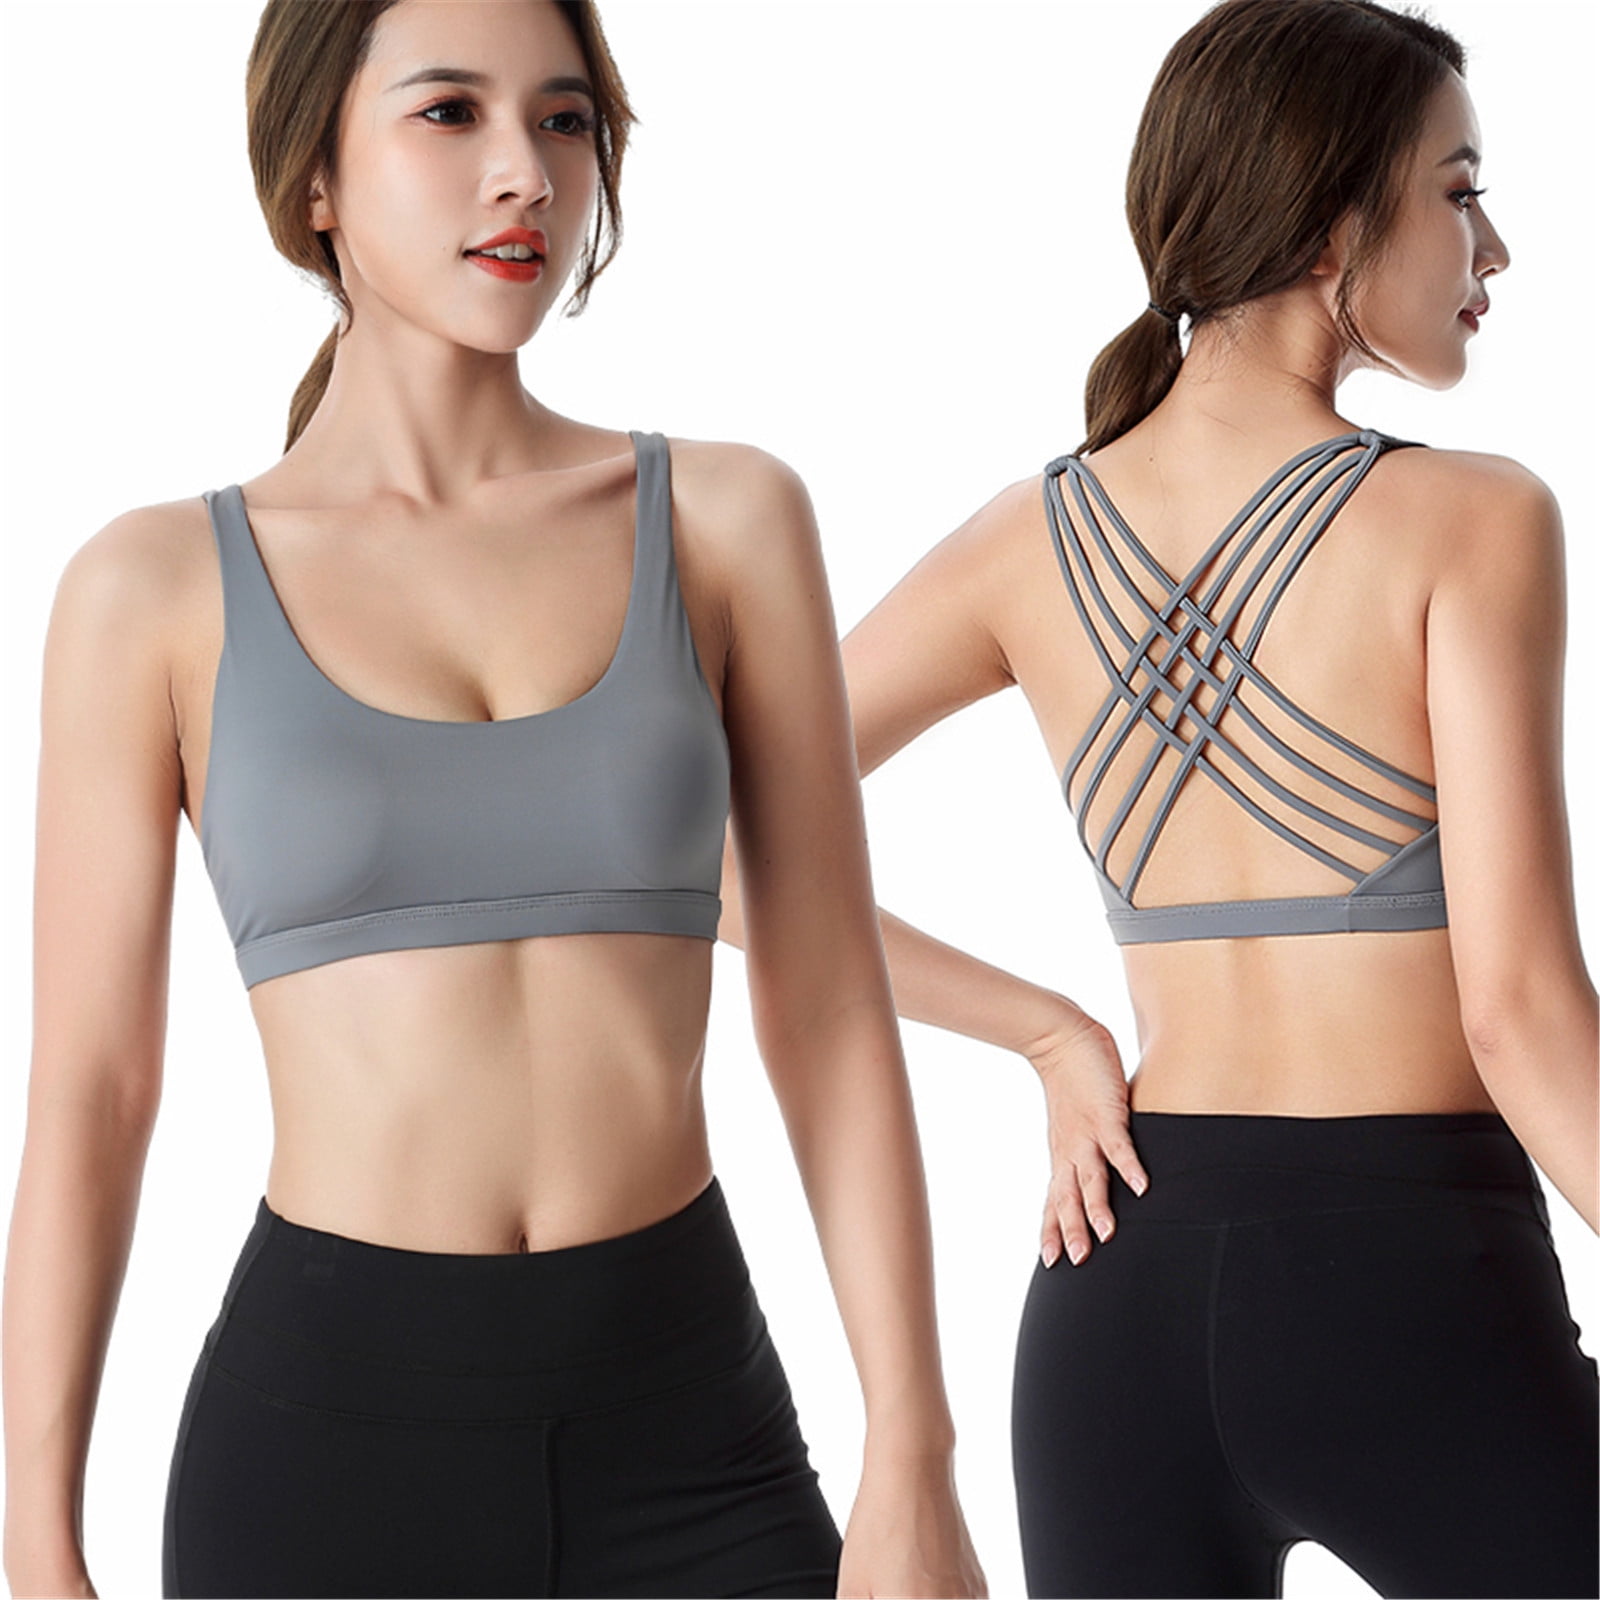 Levmjia Sports Bras For Women Plus Size Clearance Woman Bras With